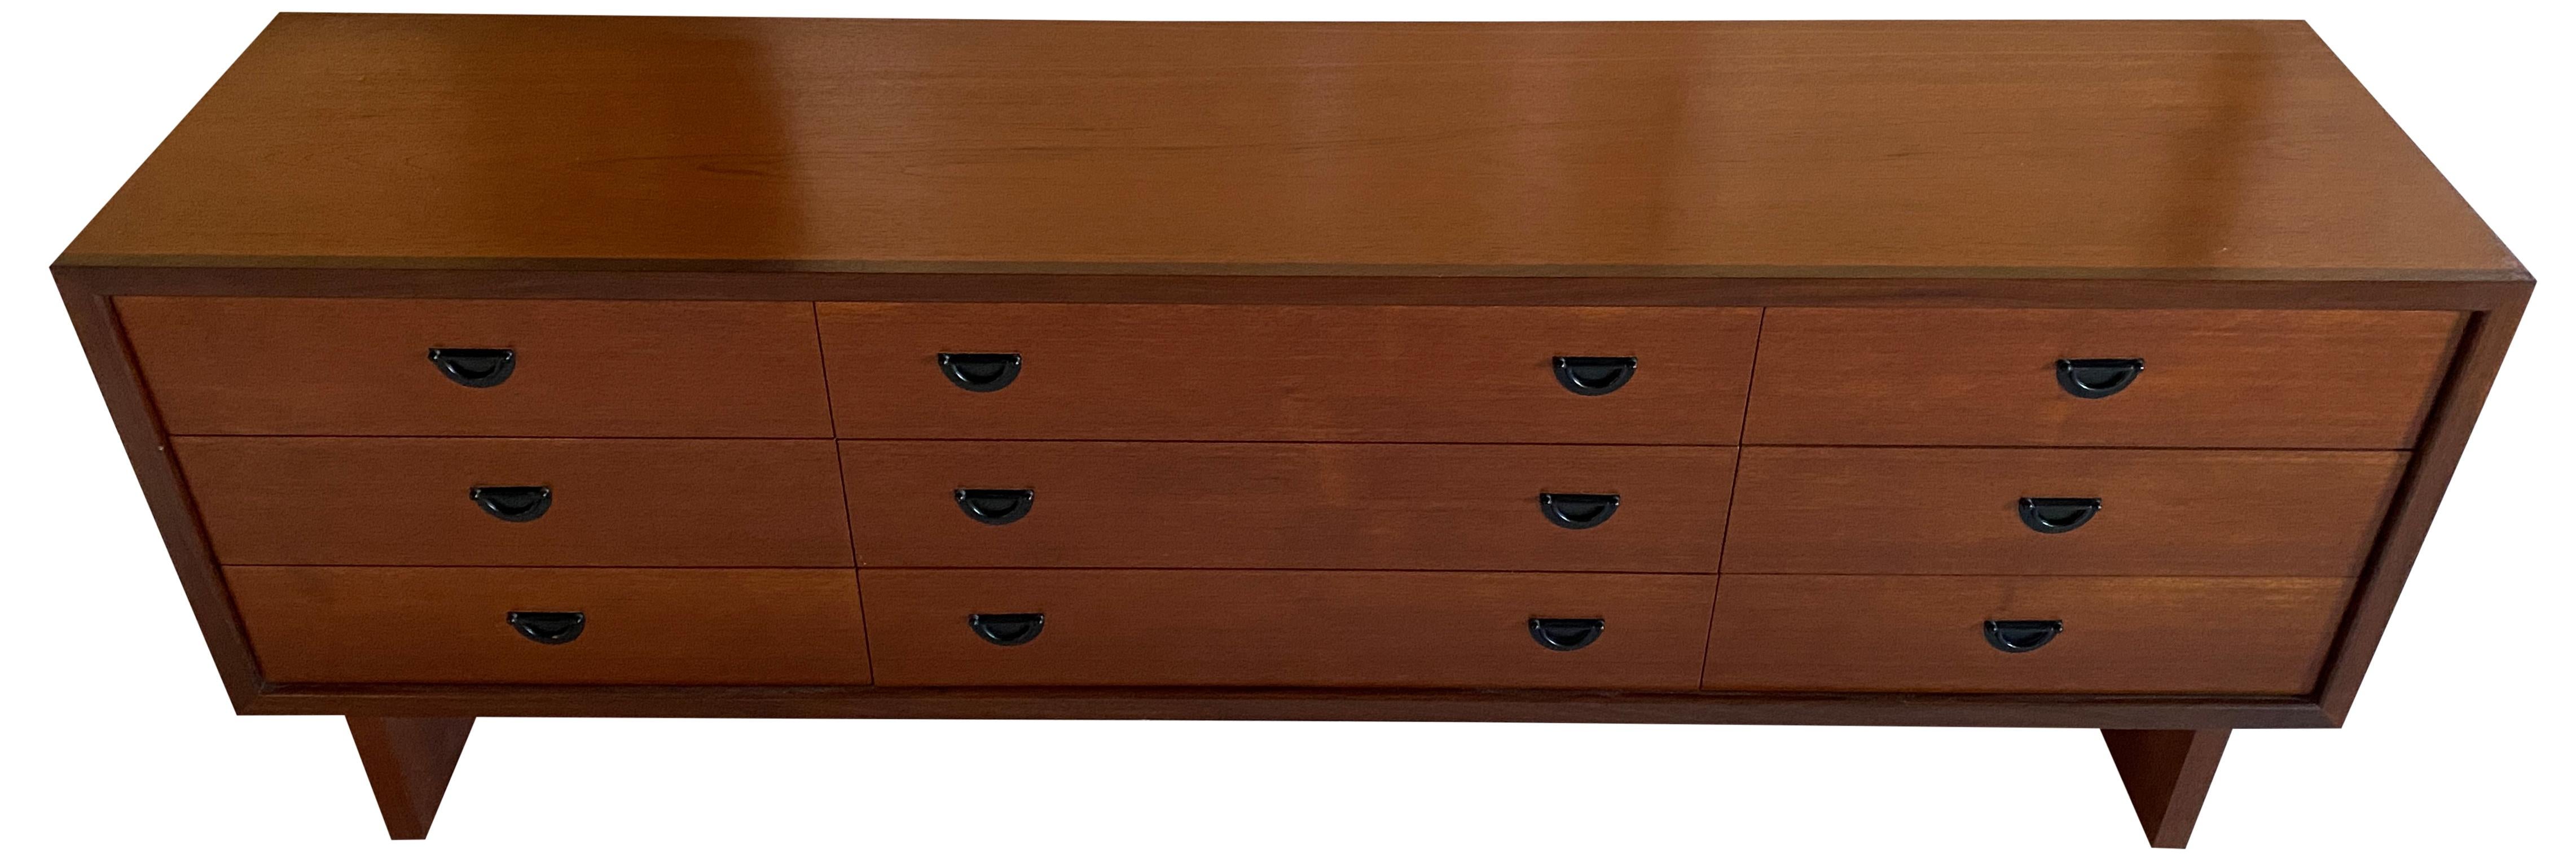 Stunning Danish Mid-Century Modern low 9 drawer dresser credenza black pulls. Impressive construction and very beautiful modern design. All 9 drawers slide smooth and very clean inside and out. Very unique teak dresser. Labeled R.S. Associates.